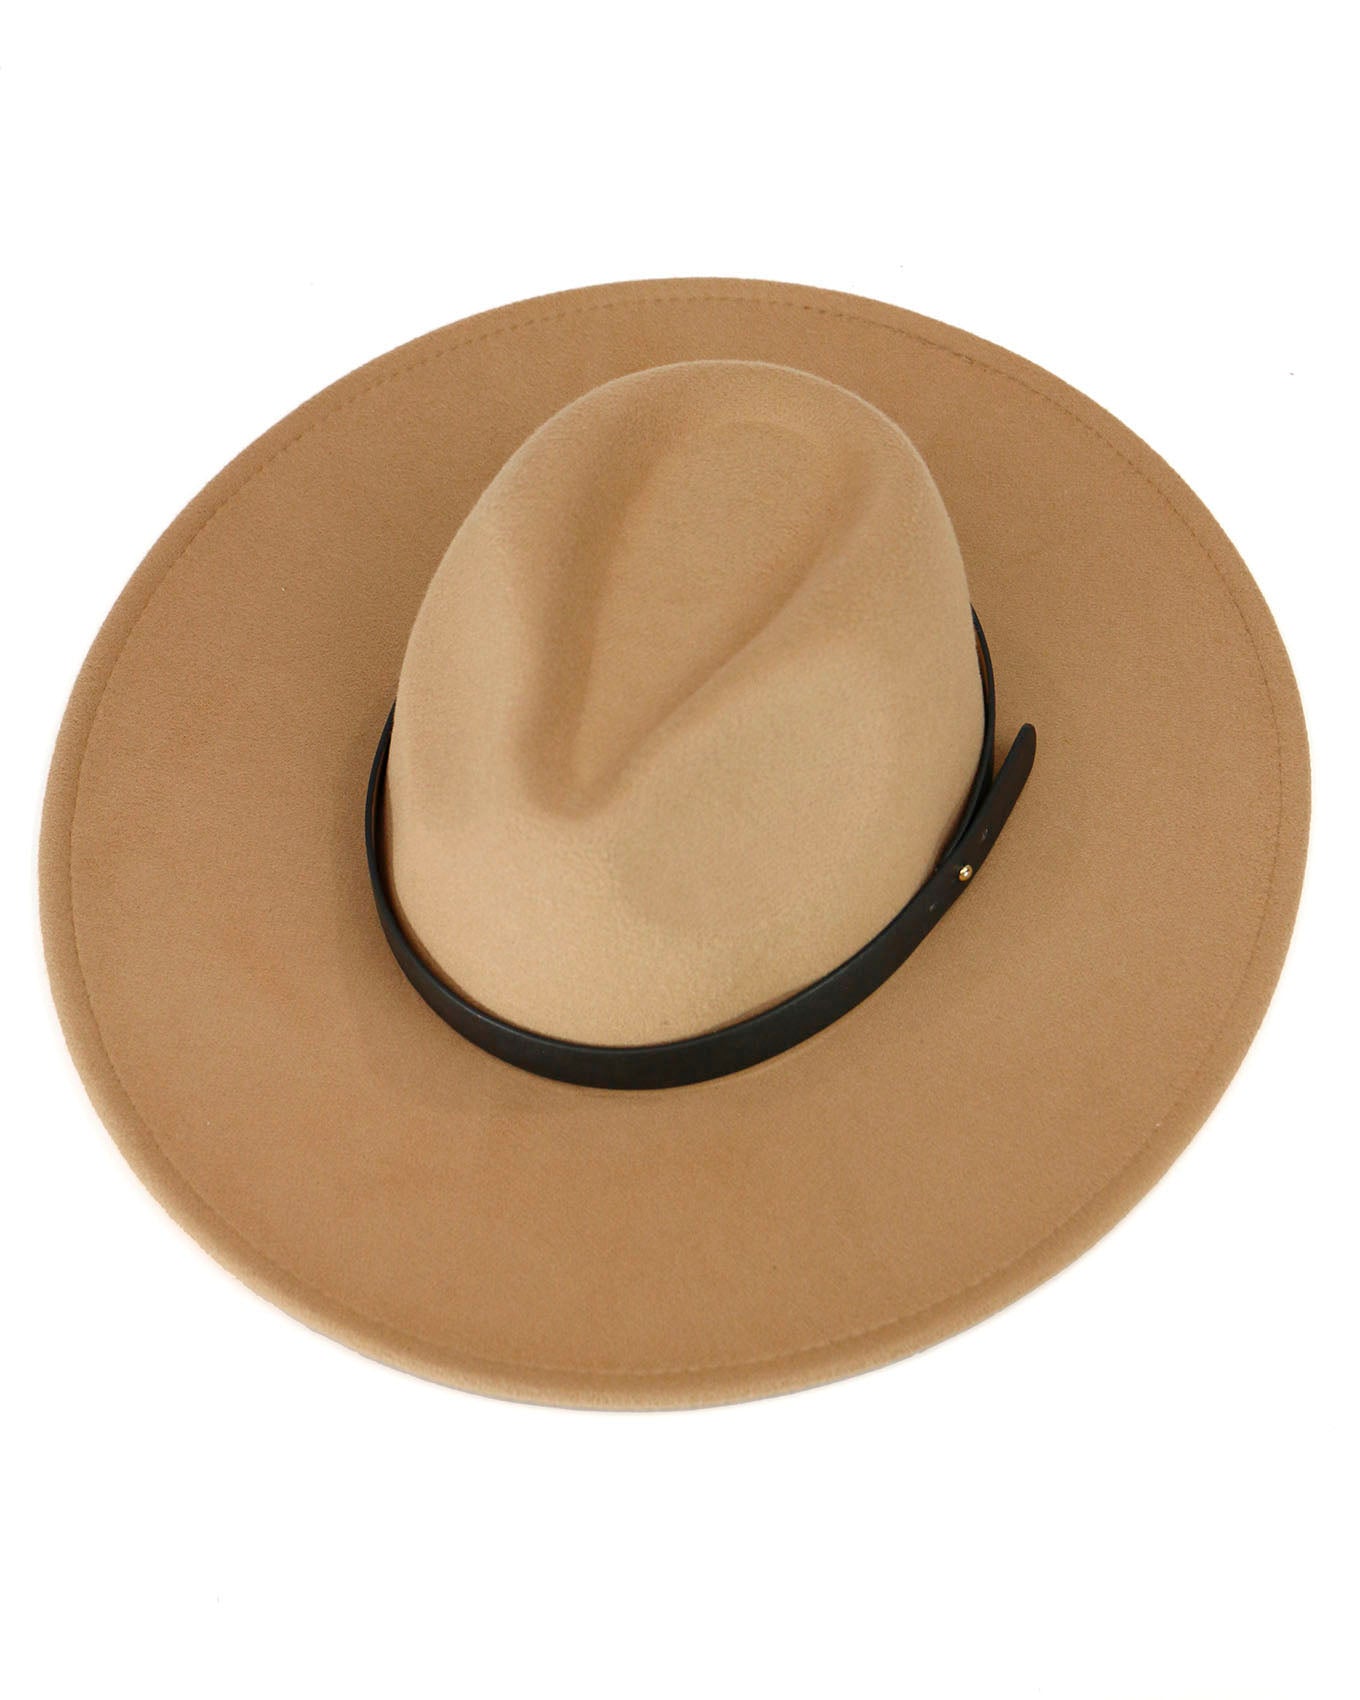 Wide Brim Felt Hat in Camel by Grace and Lace